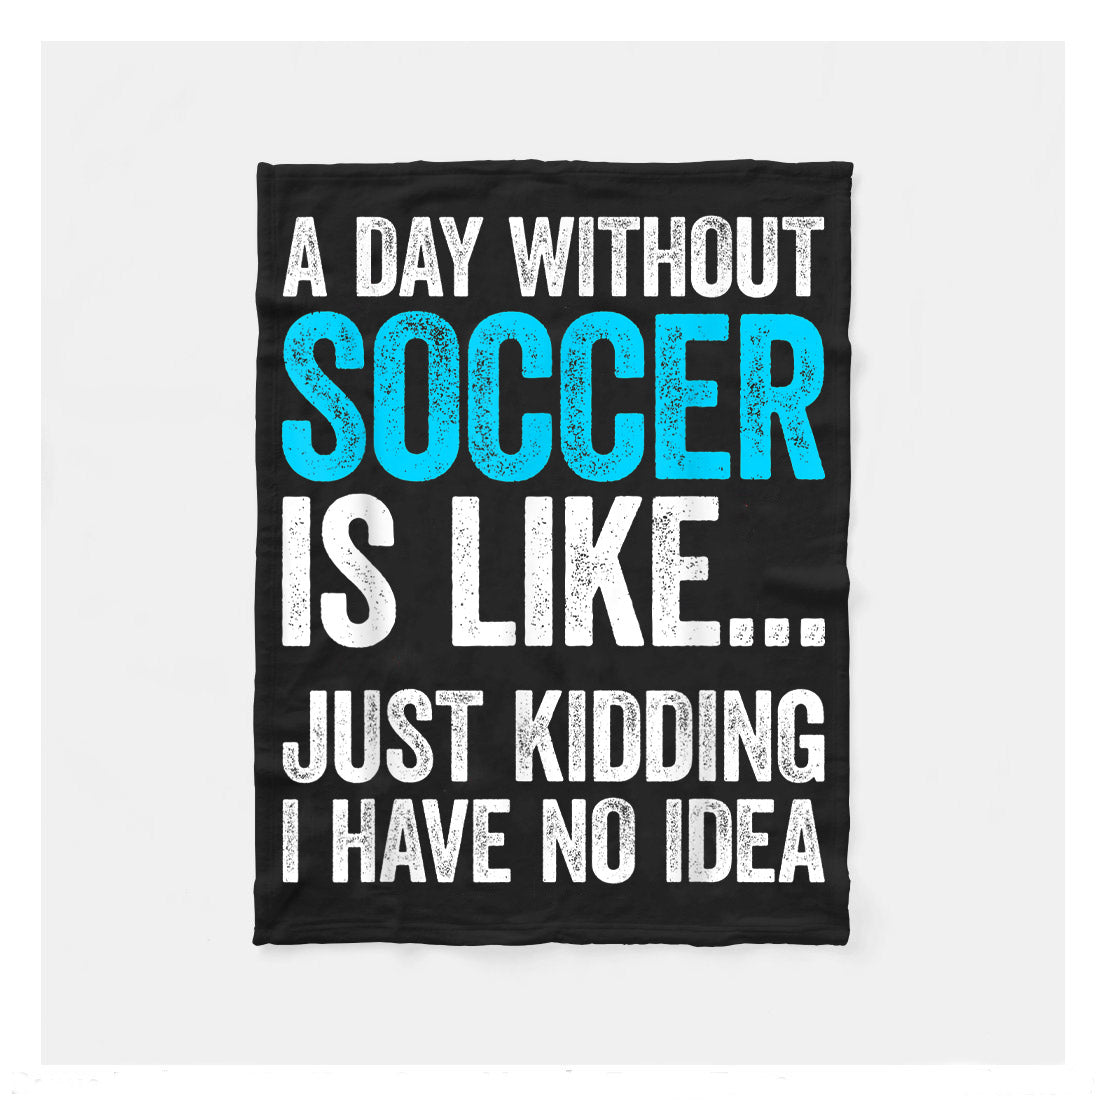 A Day Without Soccer Is Like Just Kidding I Have No Idea Sherpa Blanket,  Soccer Outdoor Blankets, Soccer Gifts For Coach And Soccer Players, Birthday Gift For Soccer Player